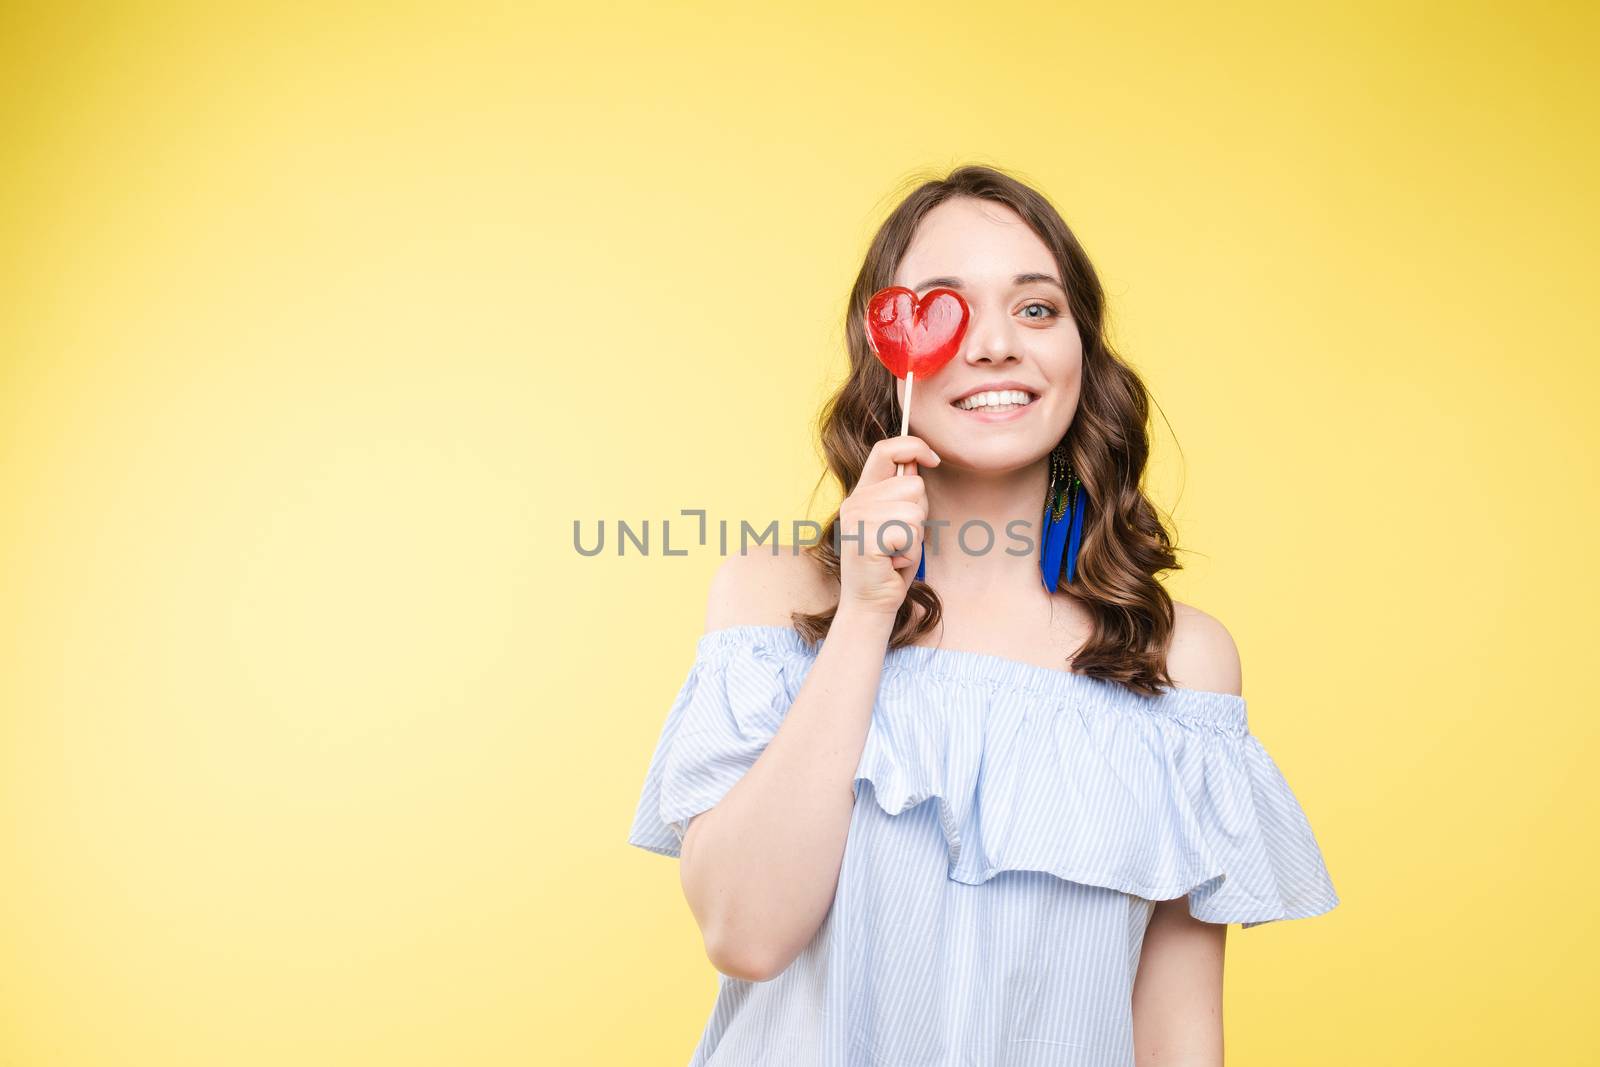 Beautiful and seductive woman wearing like sweet doll, posing at studio with candy on stick. Confident pretty woman in dress andsunglasses, holding hand on waist. Fashion, glamour.